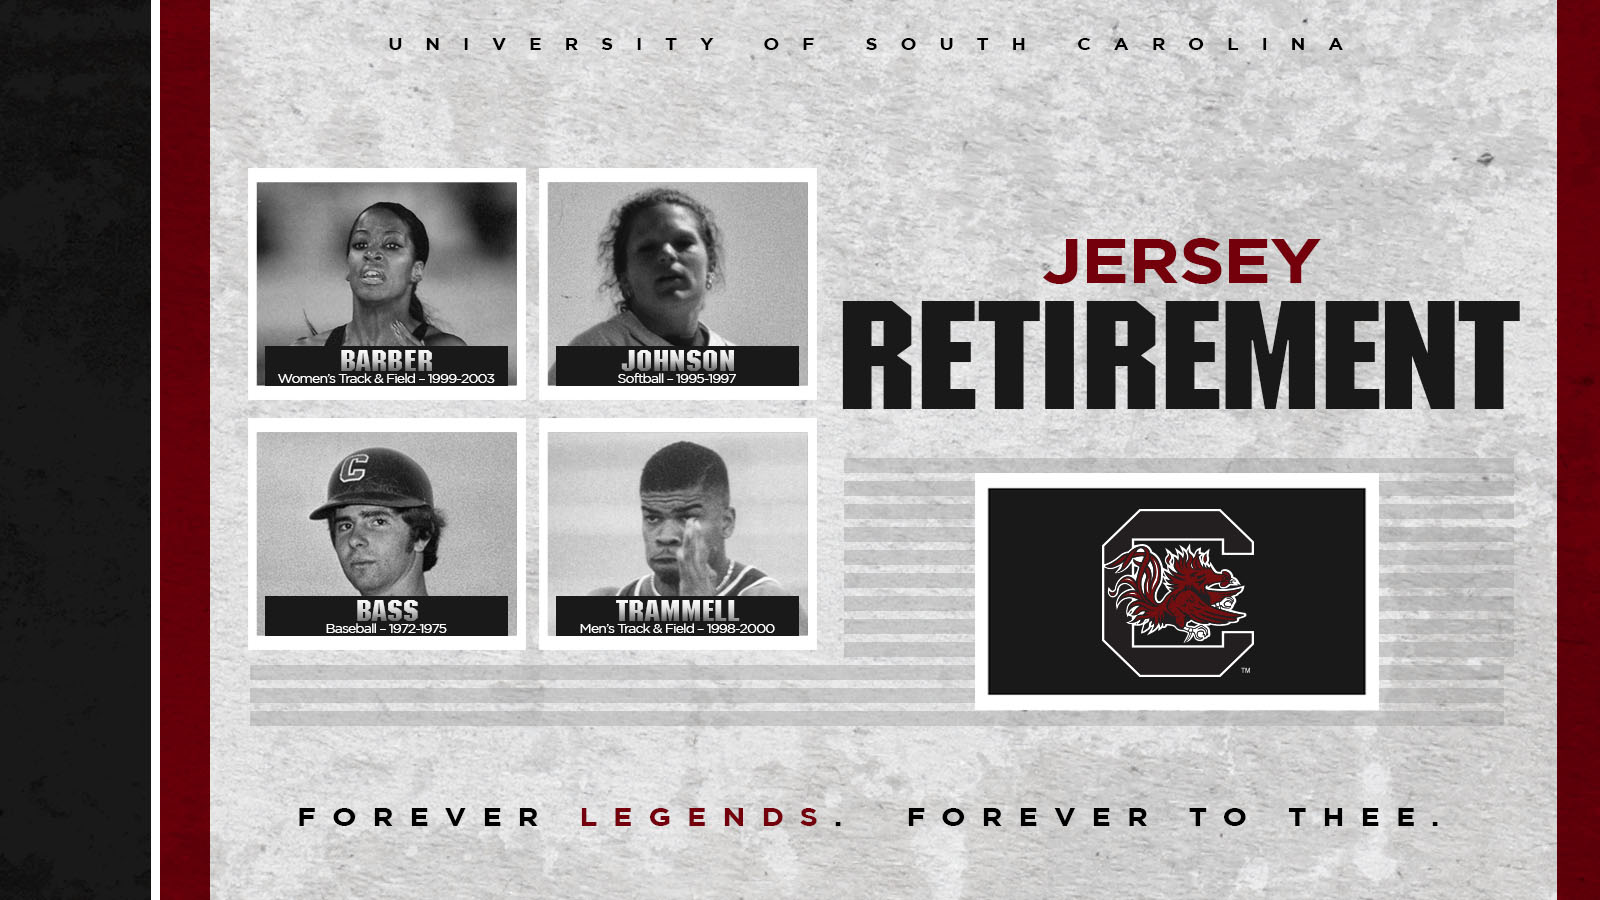 Gamecocks Announce Four Jersey Retirements for Spring 2019 Season